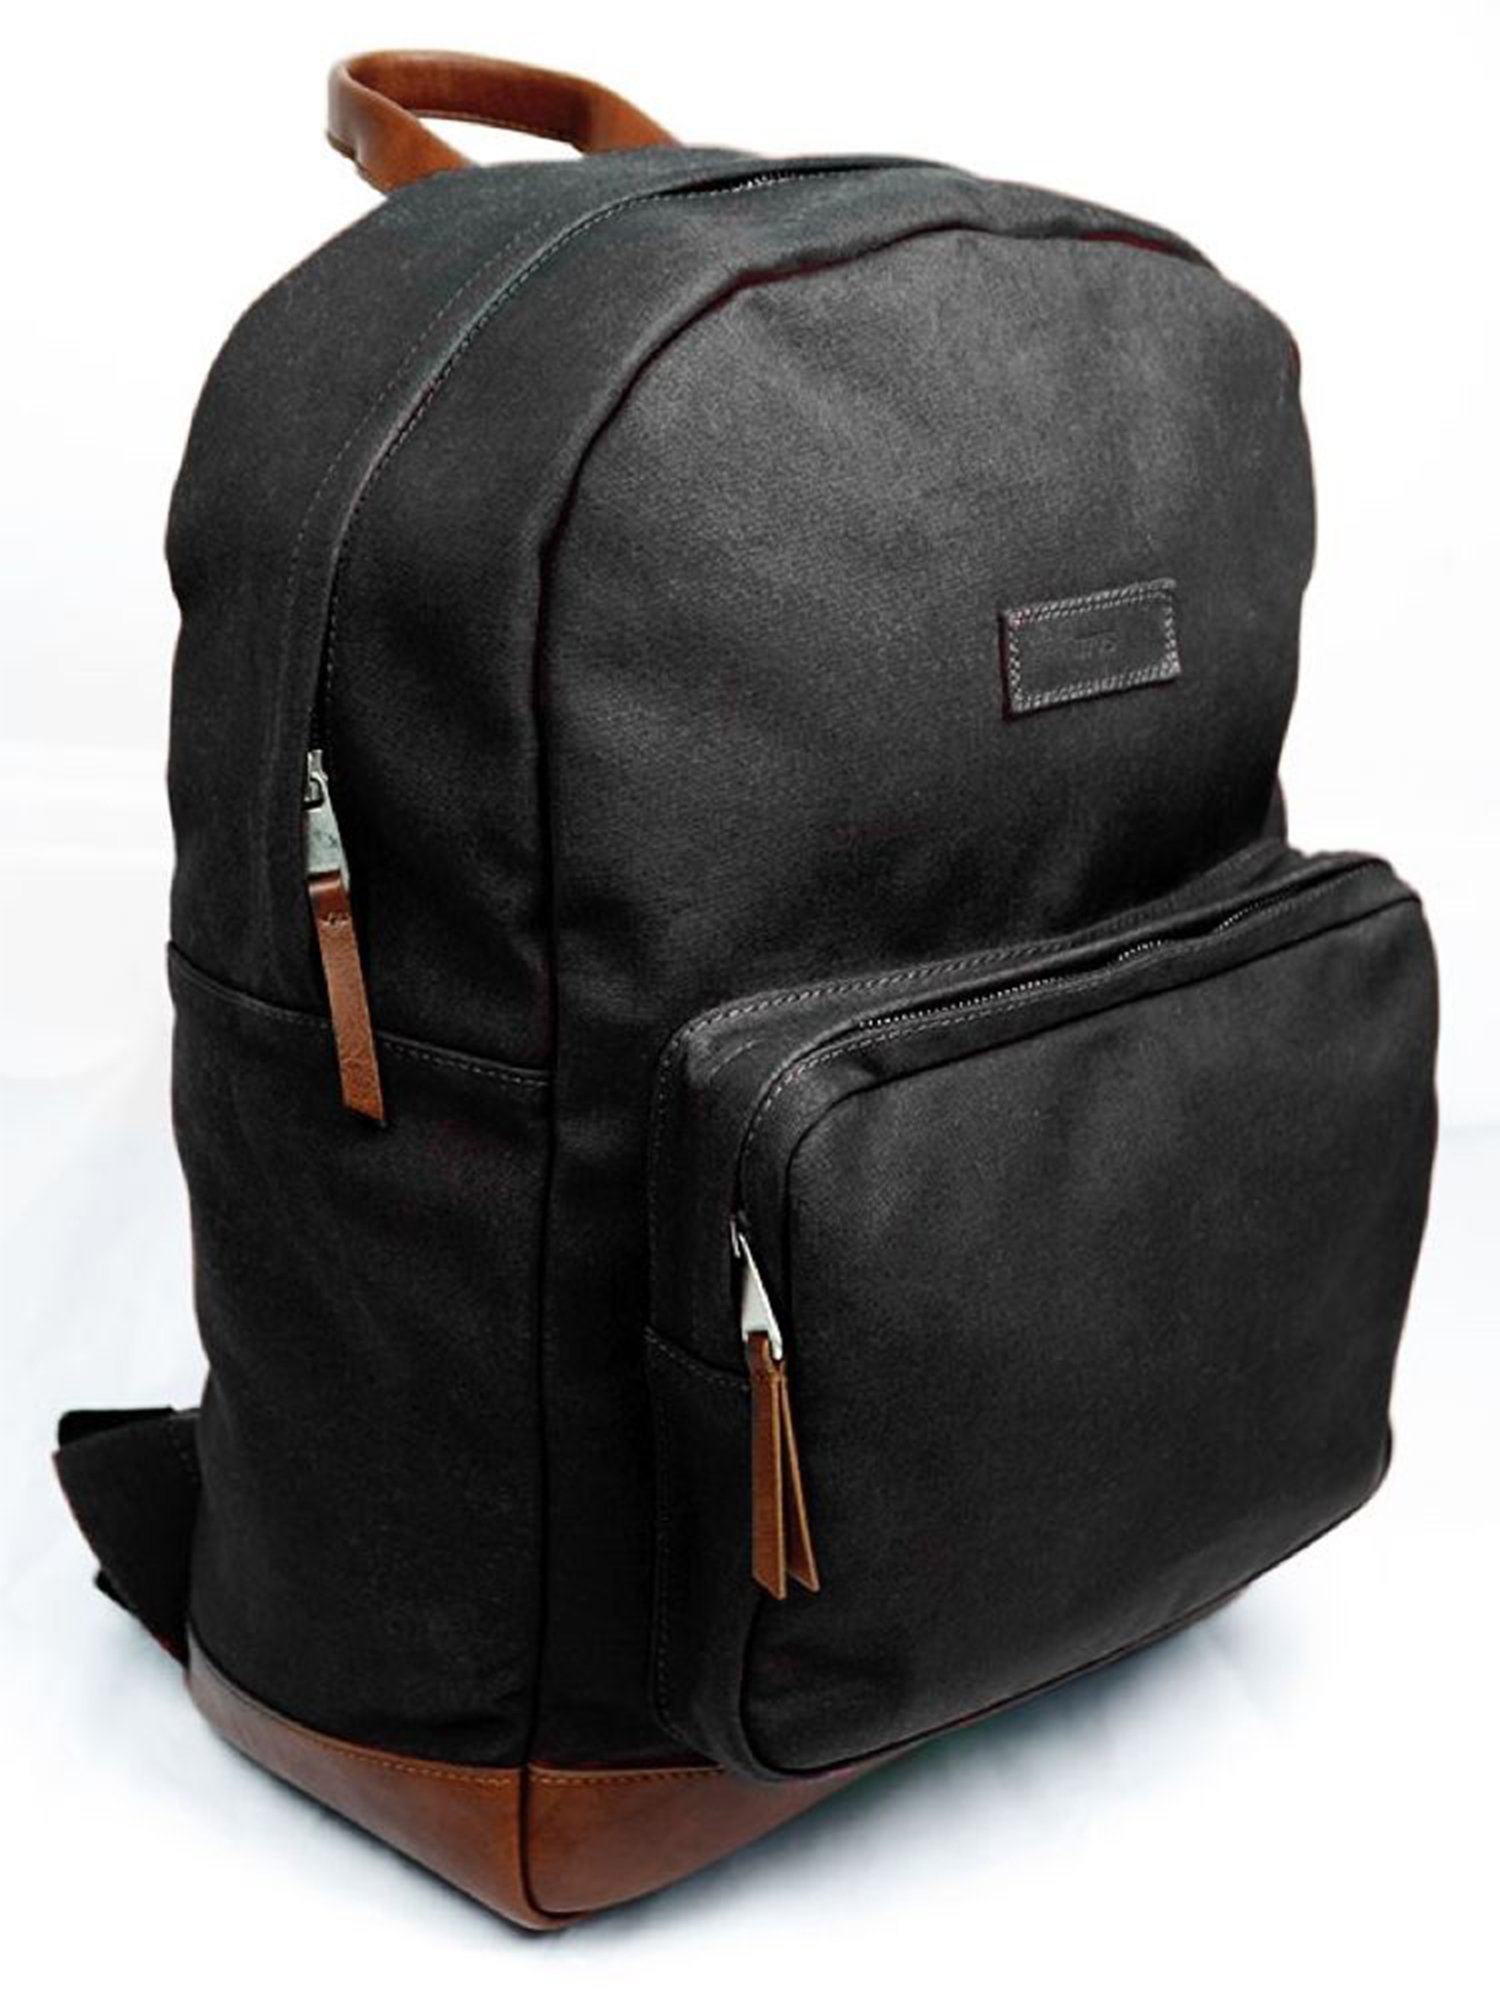 Backpack Large Black from Shop Like You Give a Damn